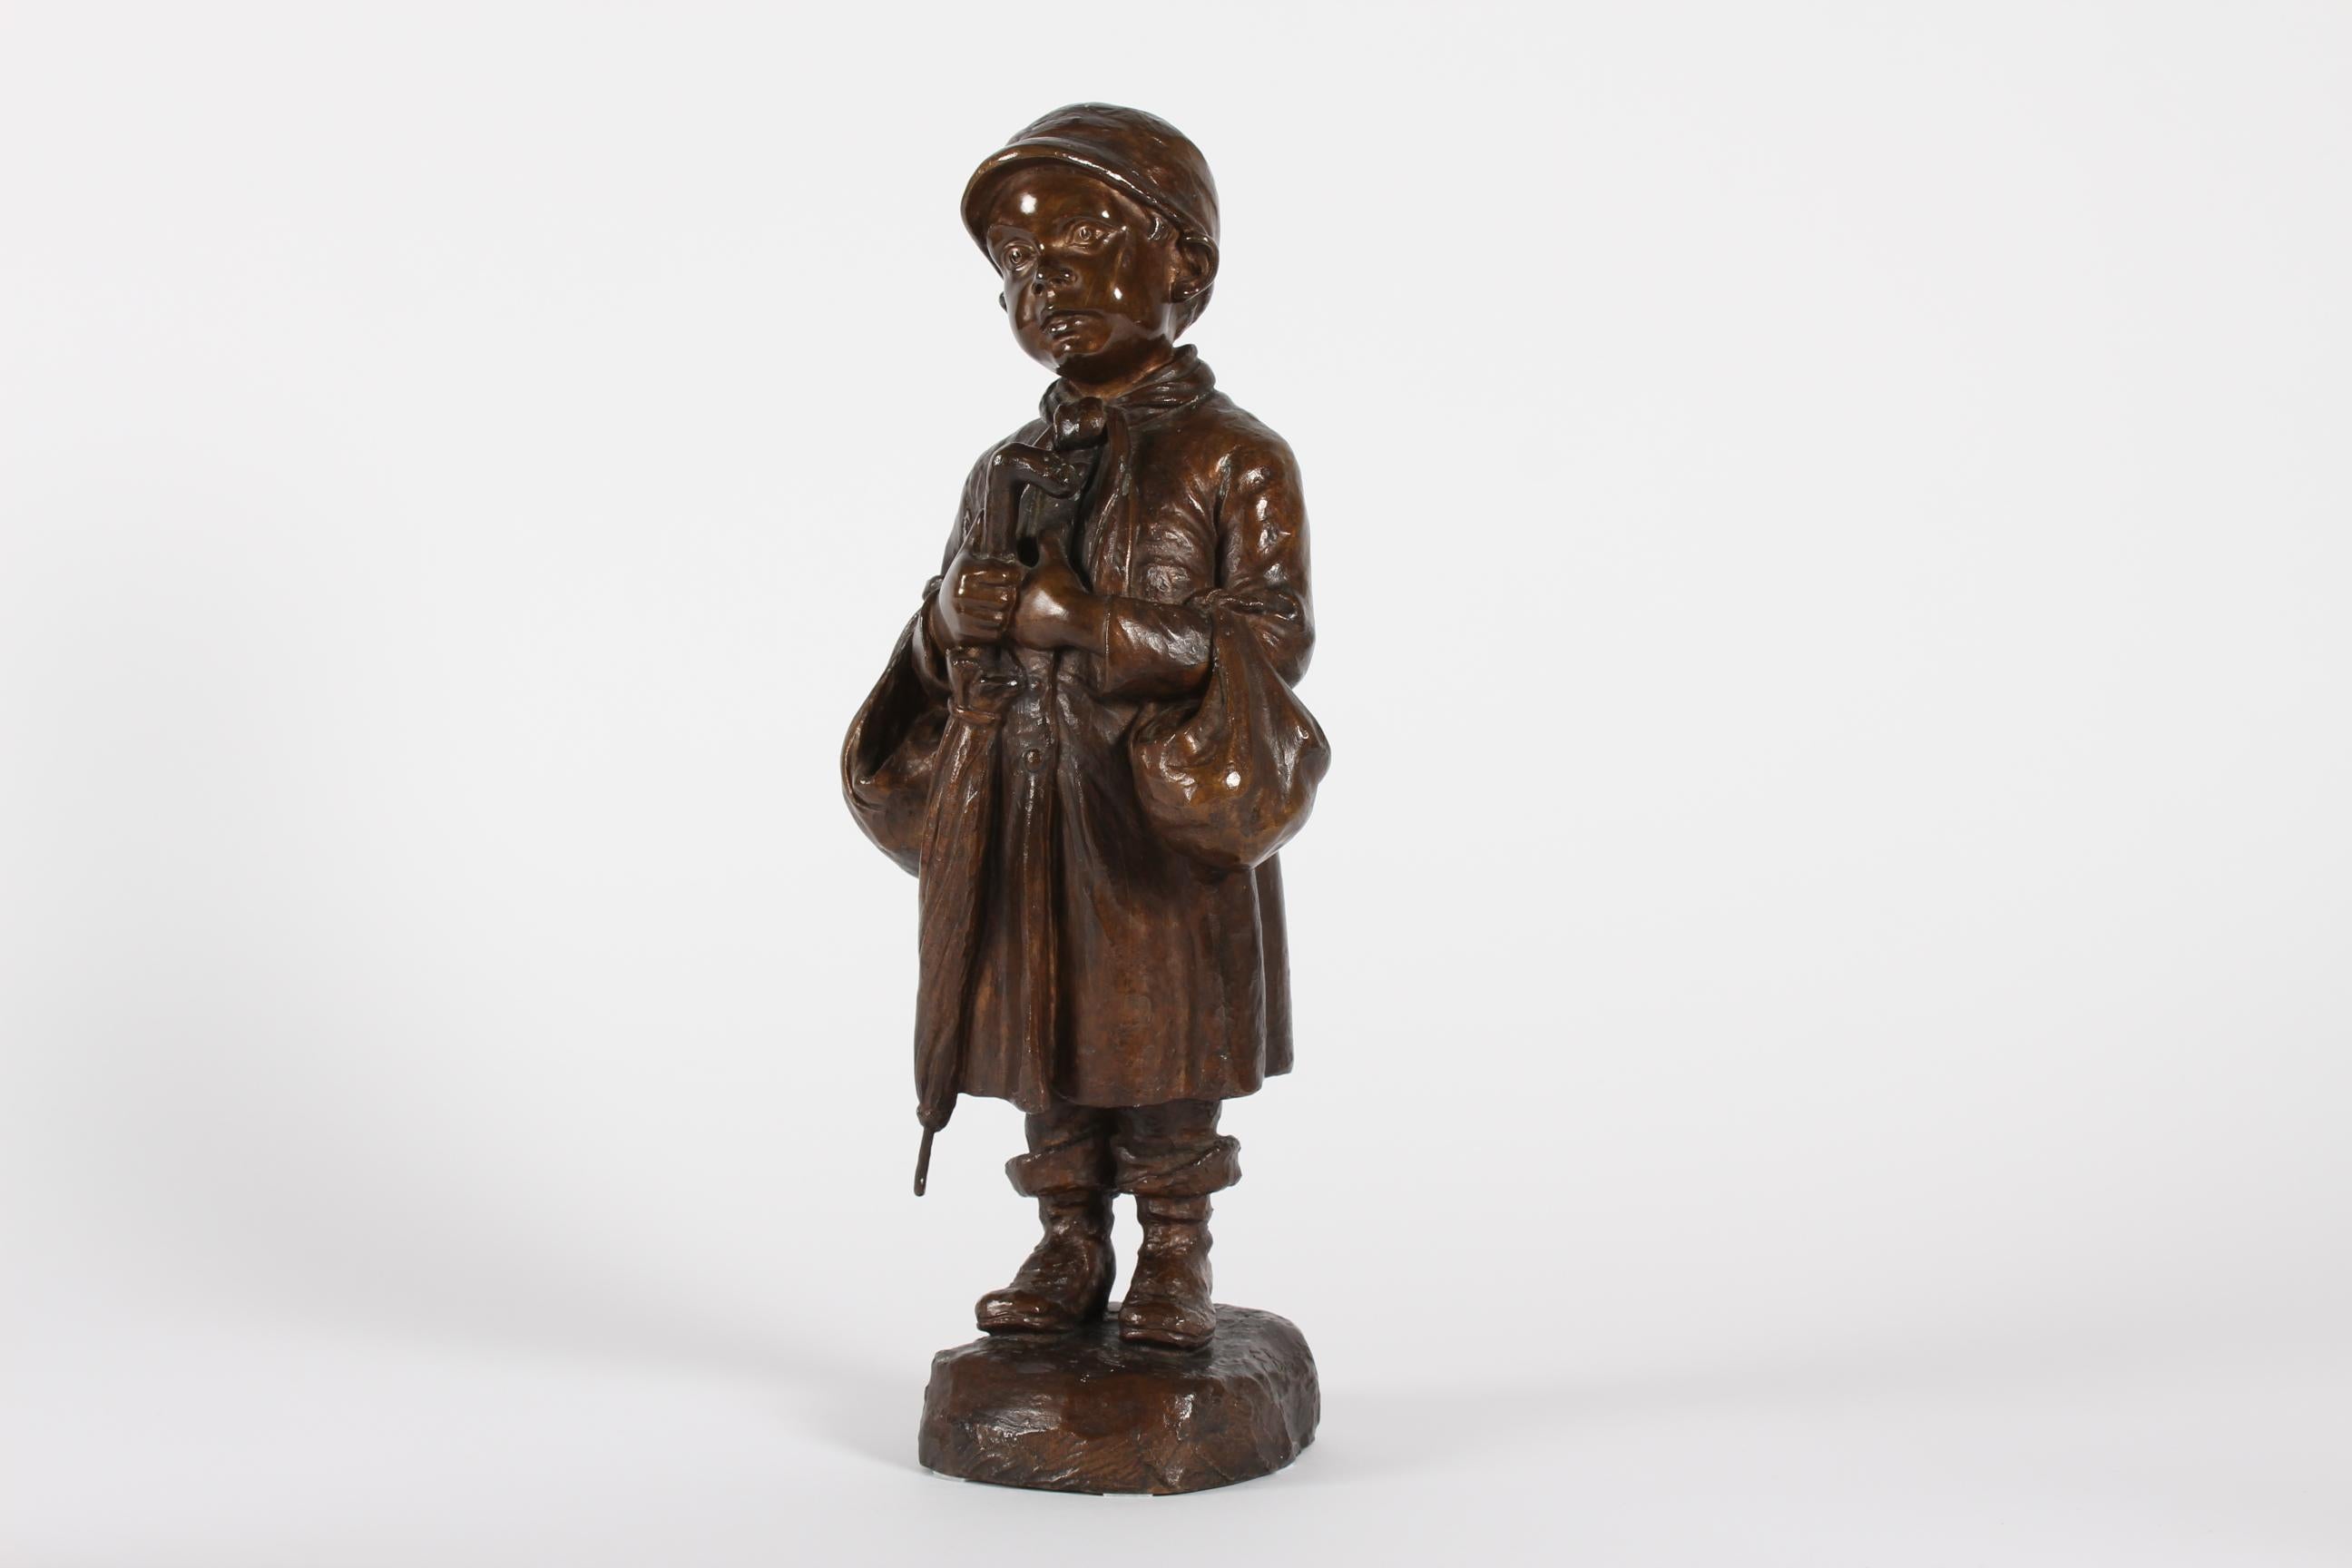 Large figurine by Danish artist and sculptor Elna Borch (1869-1950)
featuring a young boy with umbrella. It´s made of bronze with brown patina.
Made circa 1940s or 1950s by bronze foundry L. Rasmussen in Copenhagen.

Sign. E. Borch + stamp for the